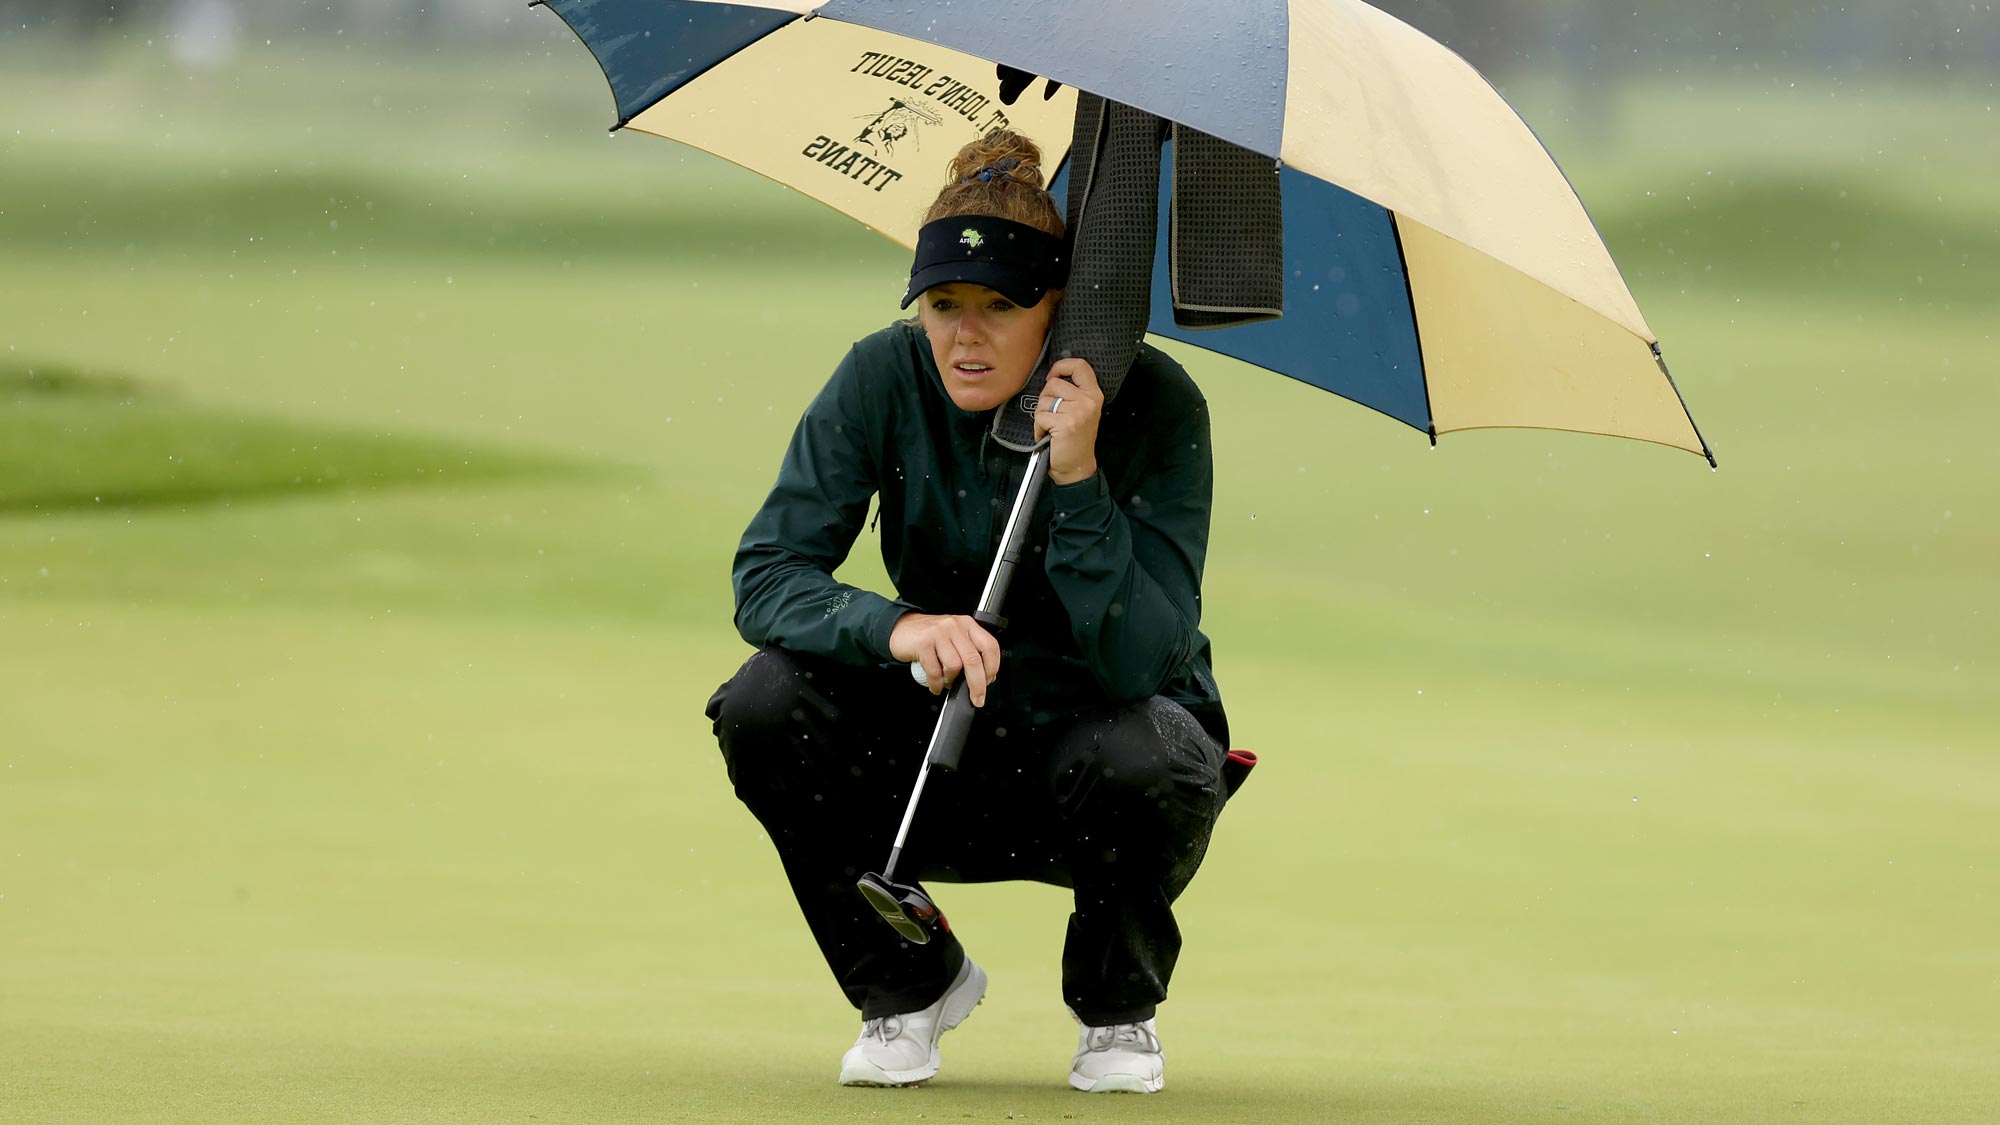 Amy Olson lines up a putt on the second green under an umbrella to avoid the rain during the second round of the LPGA Drive On Championship